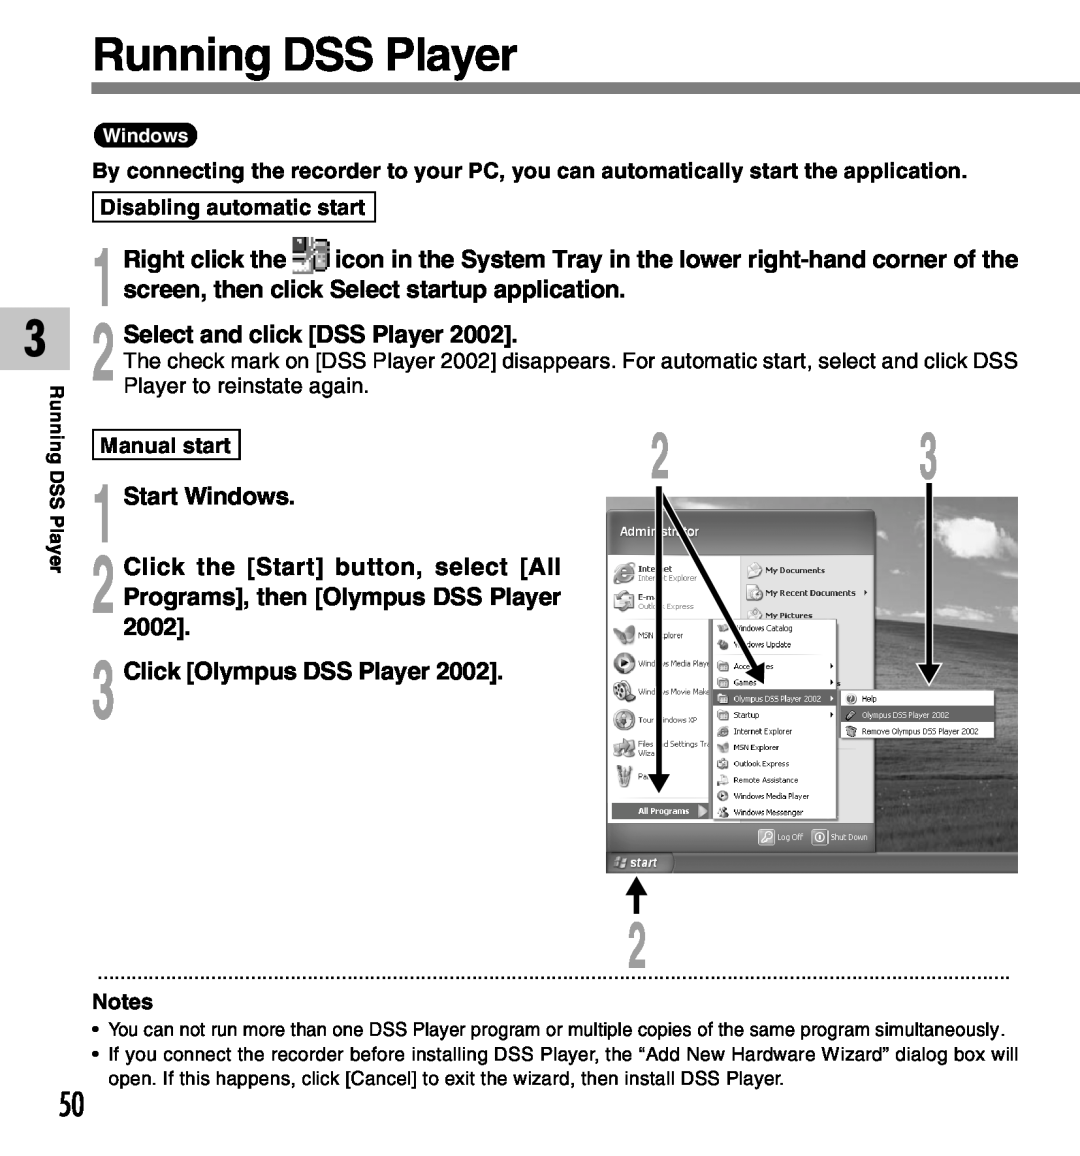 Olympus DM-10 manual Running DSS Player, Right click the, screen, then click Select startup application, 2002, Manual start 